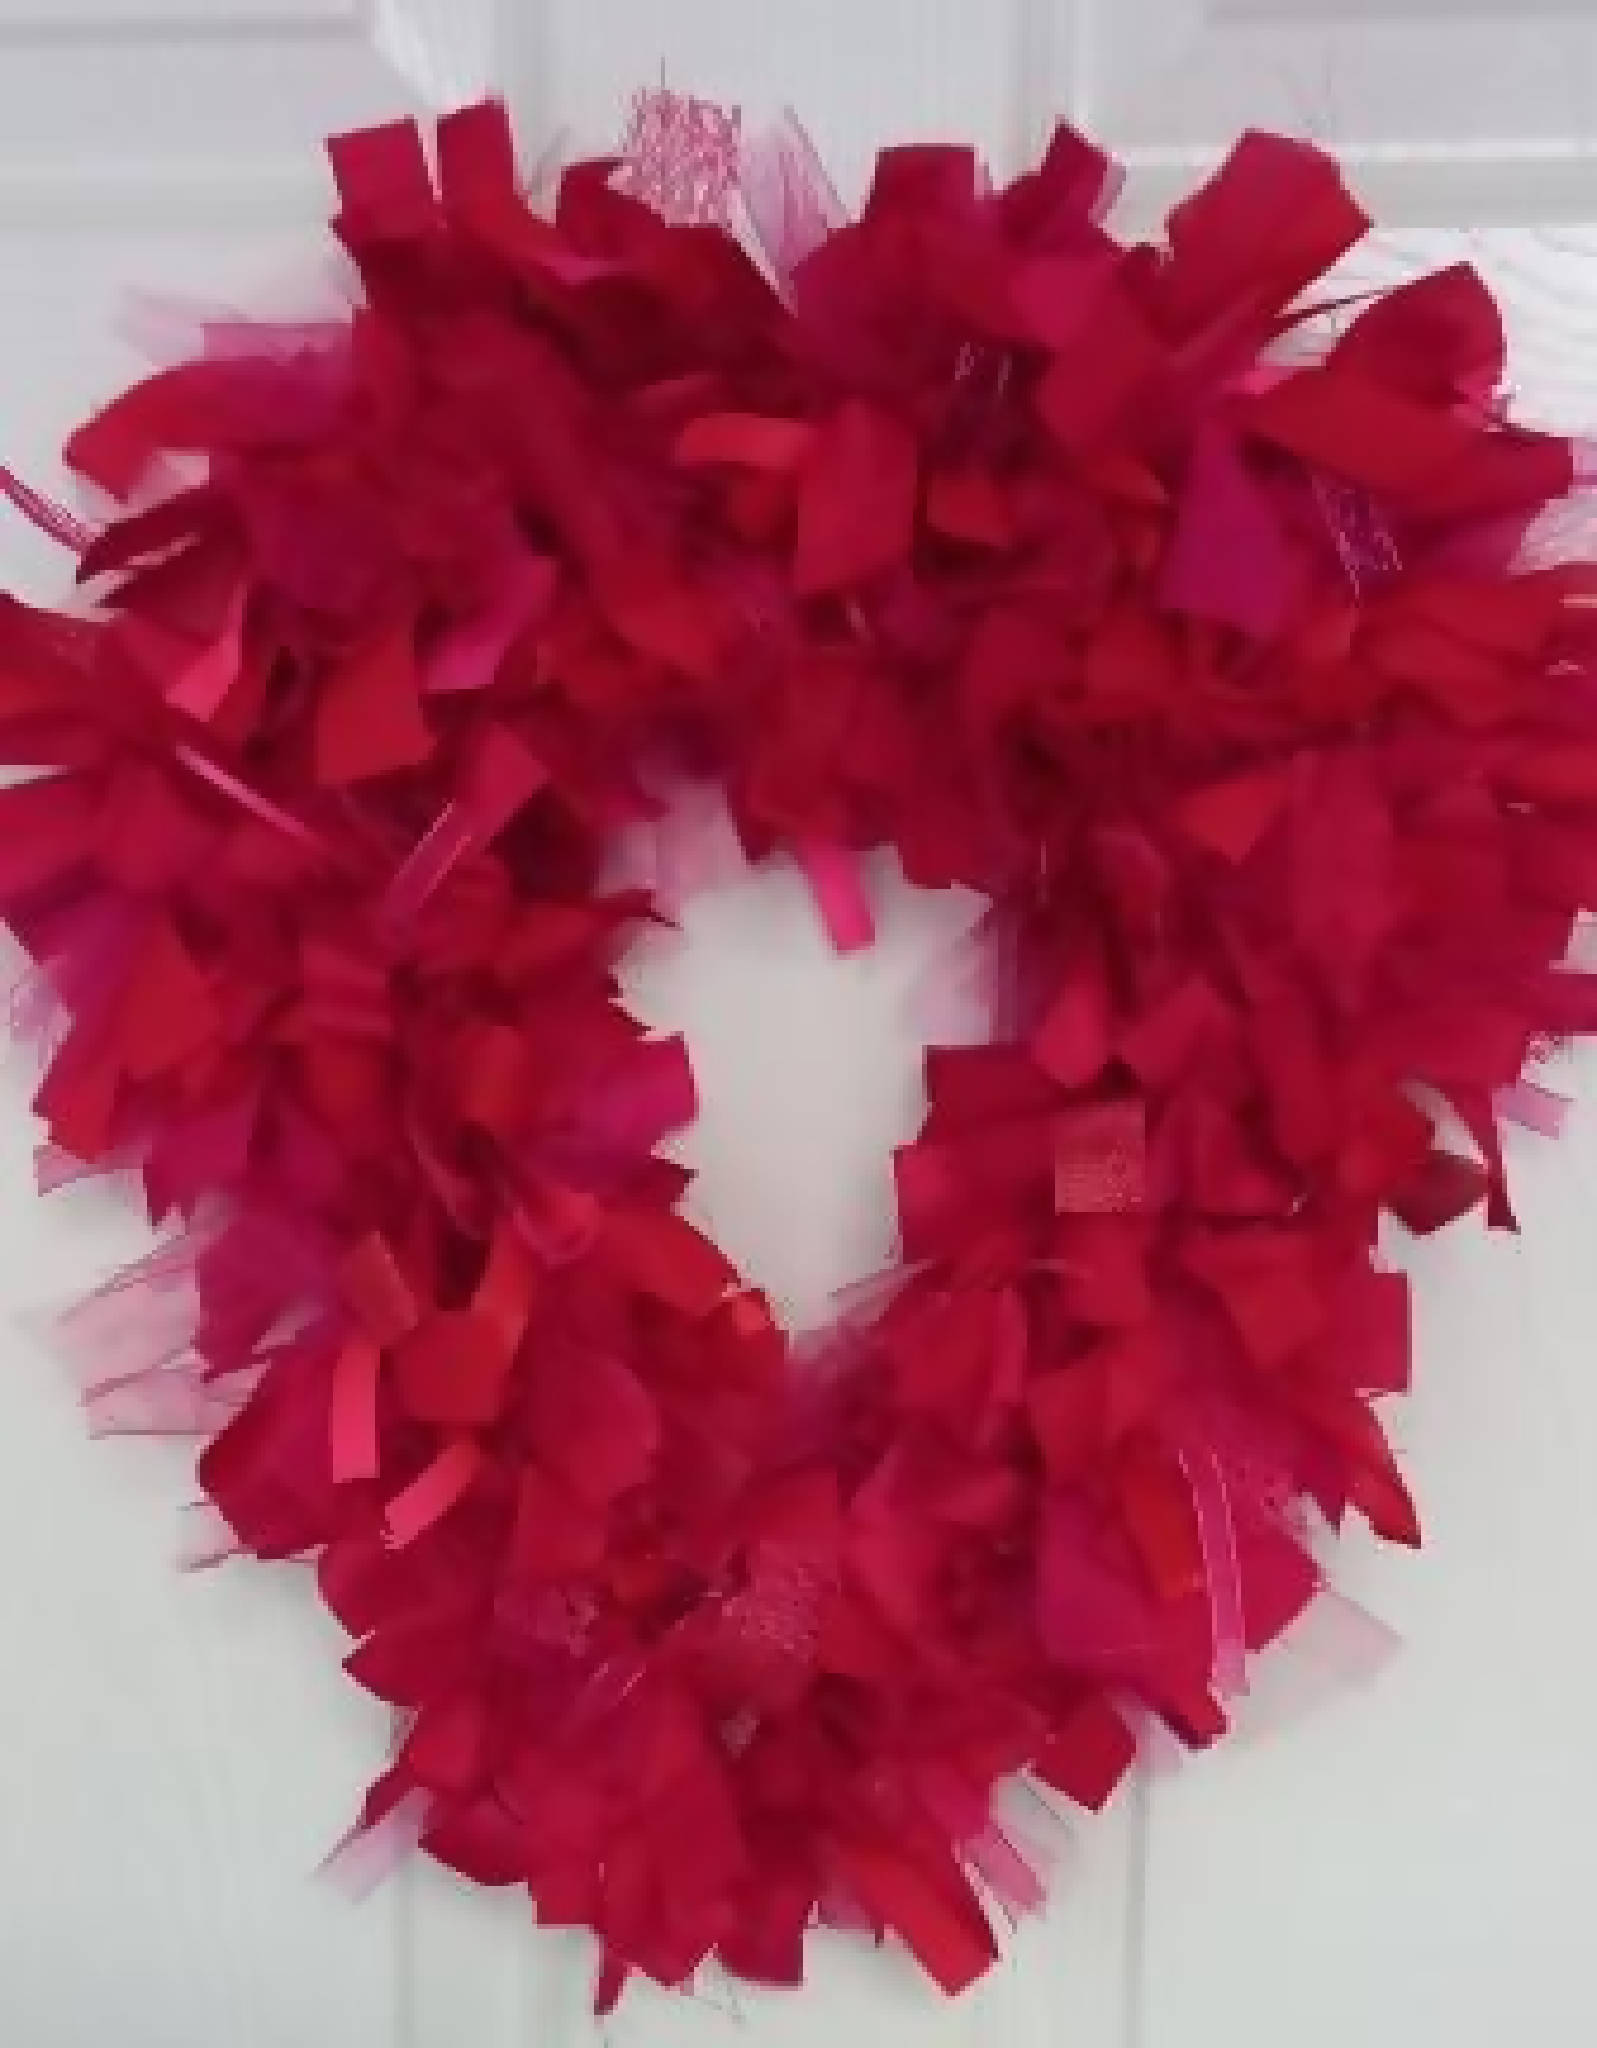 Rag Wreath Heart Shaped in Reds and Pinks